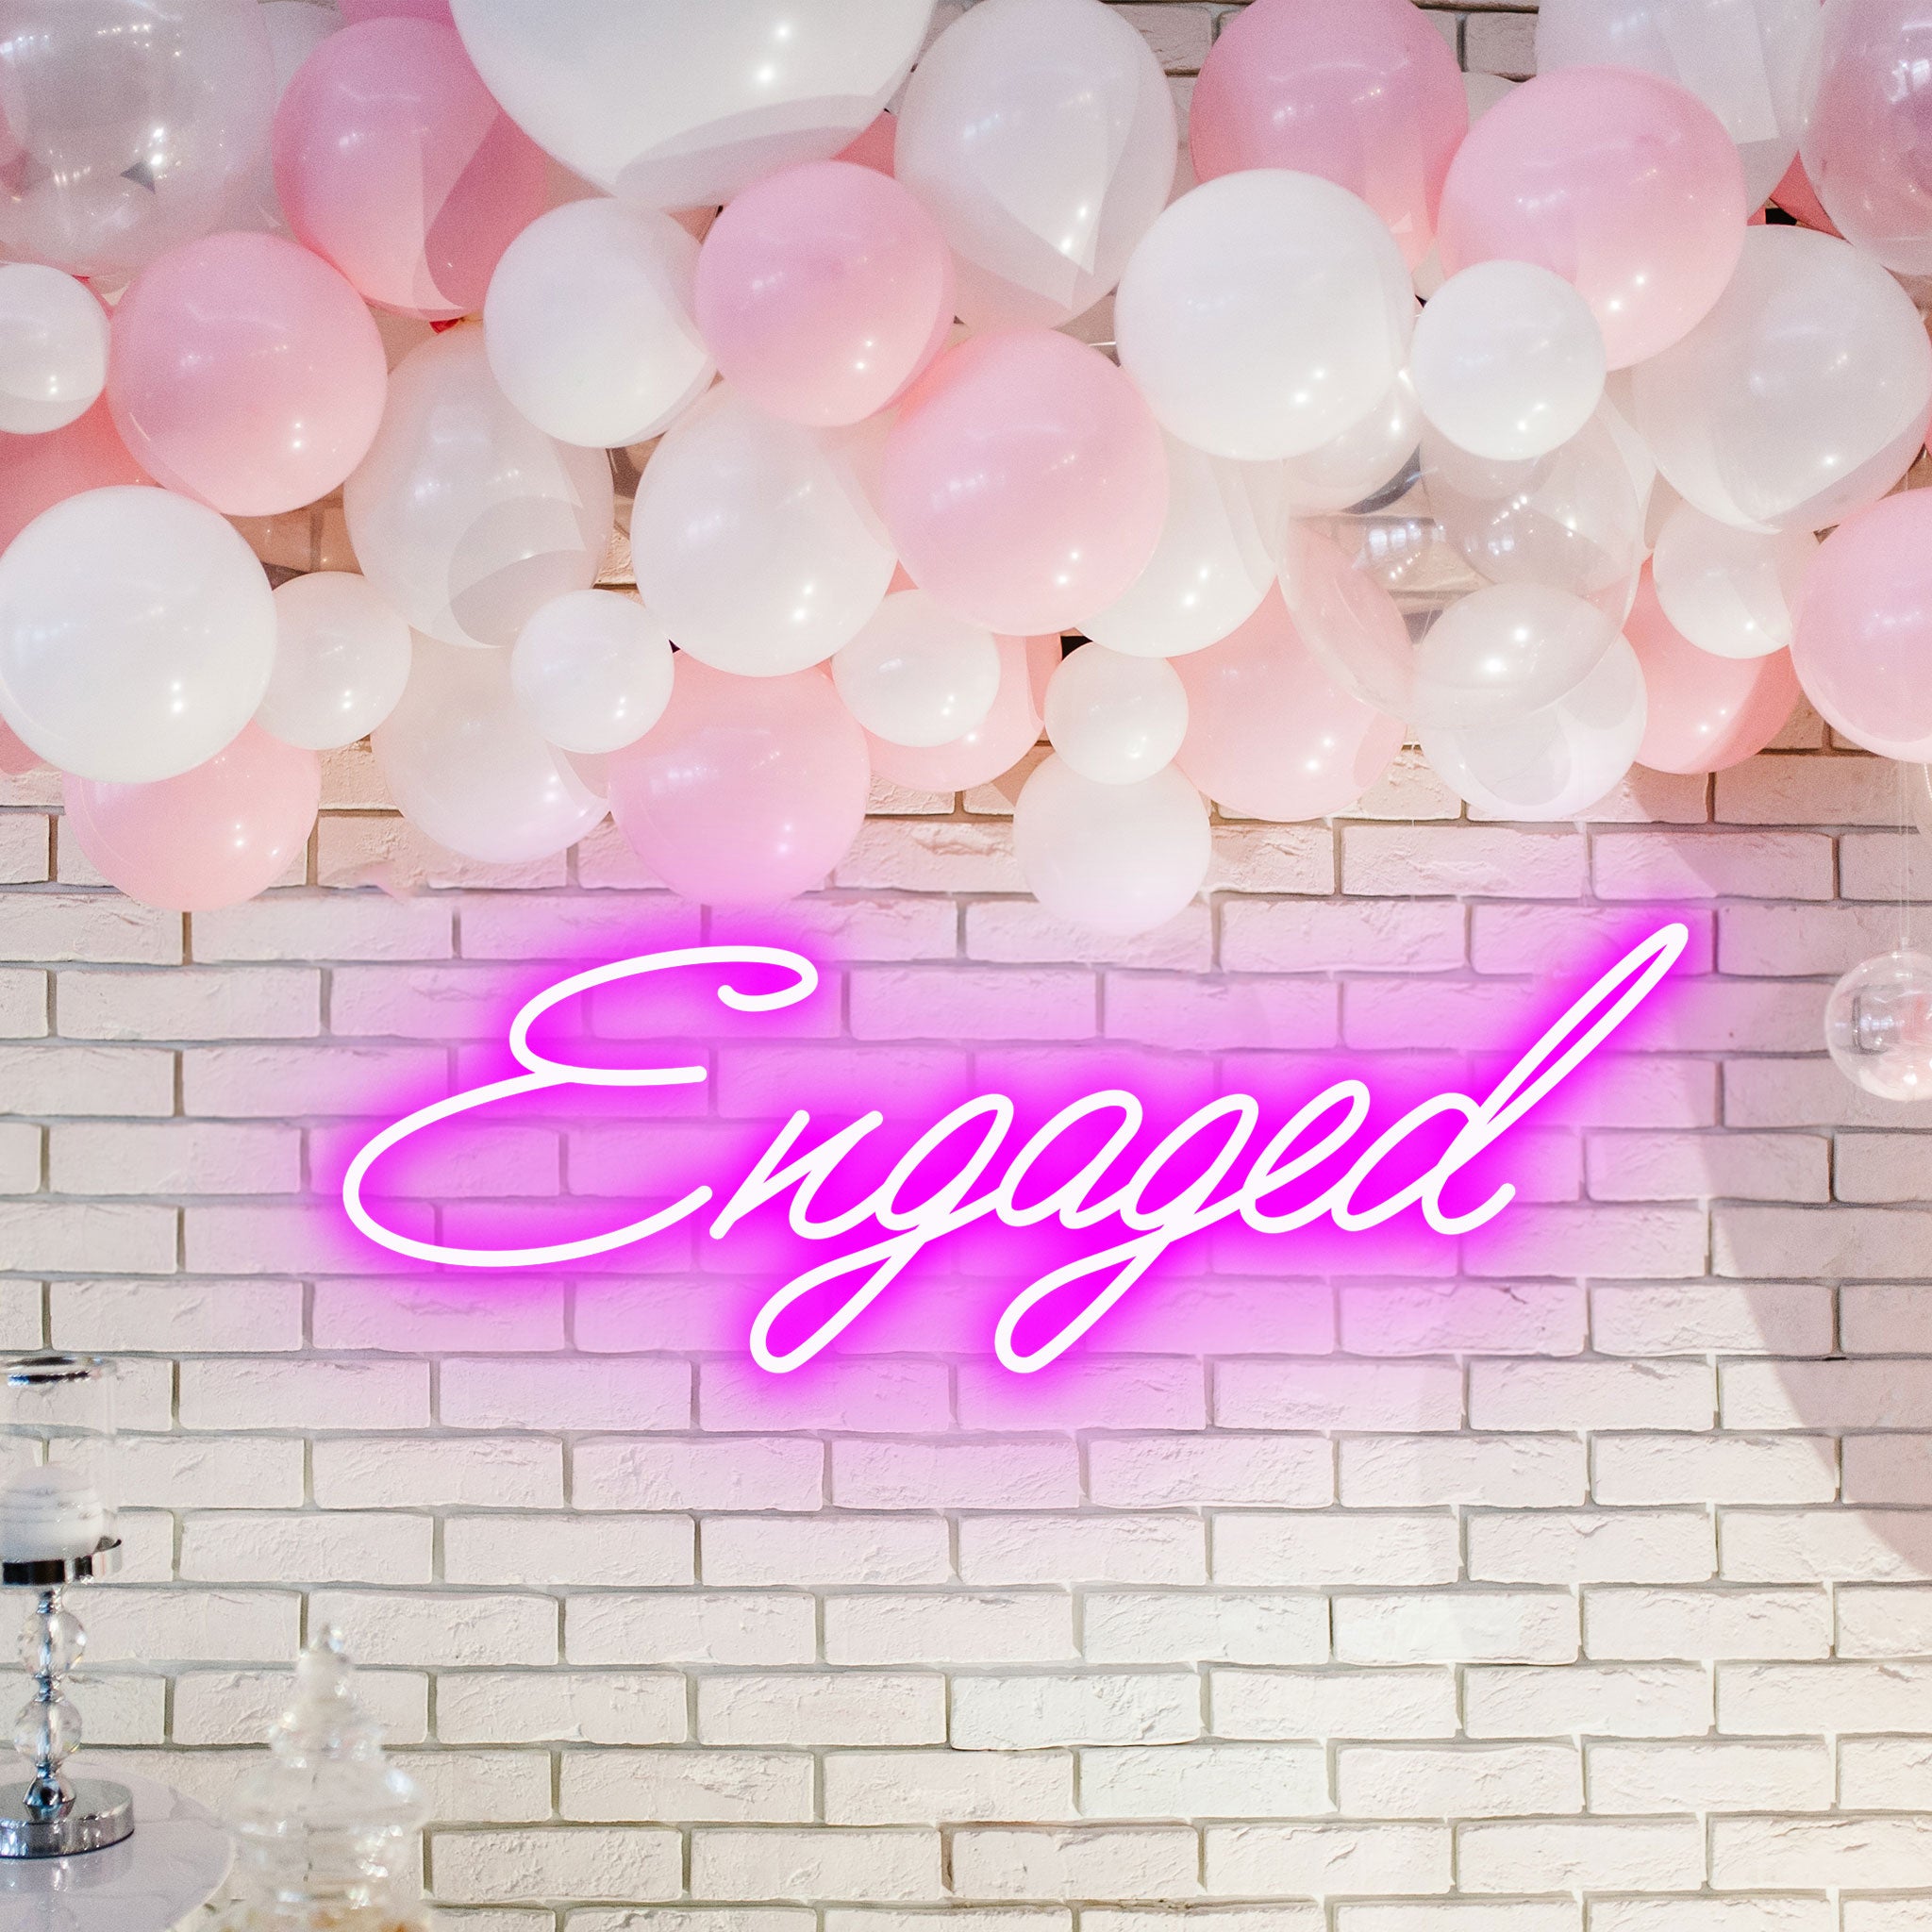 Engaged - Neon Sign - Wedding Engagement Event